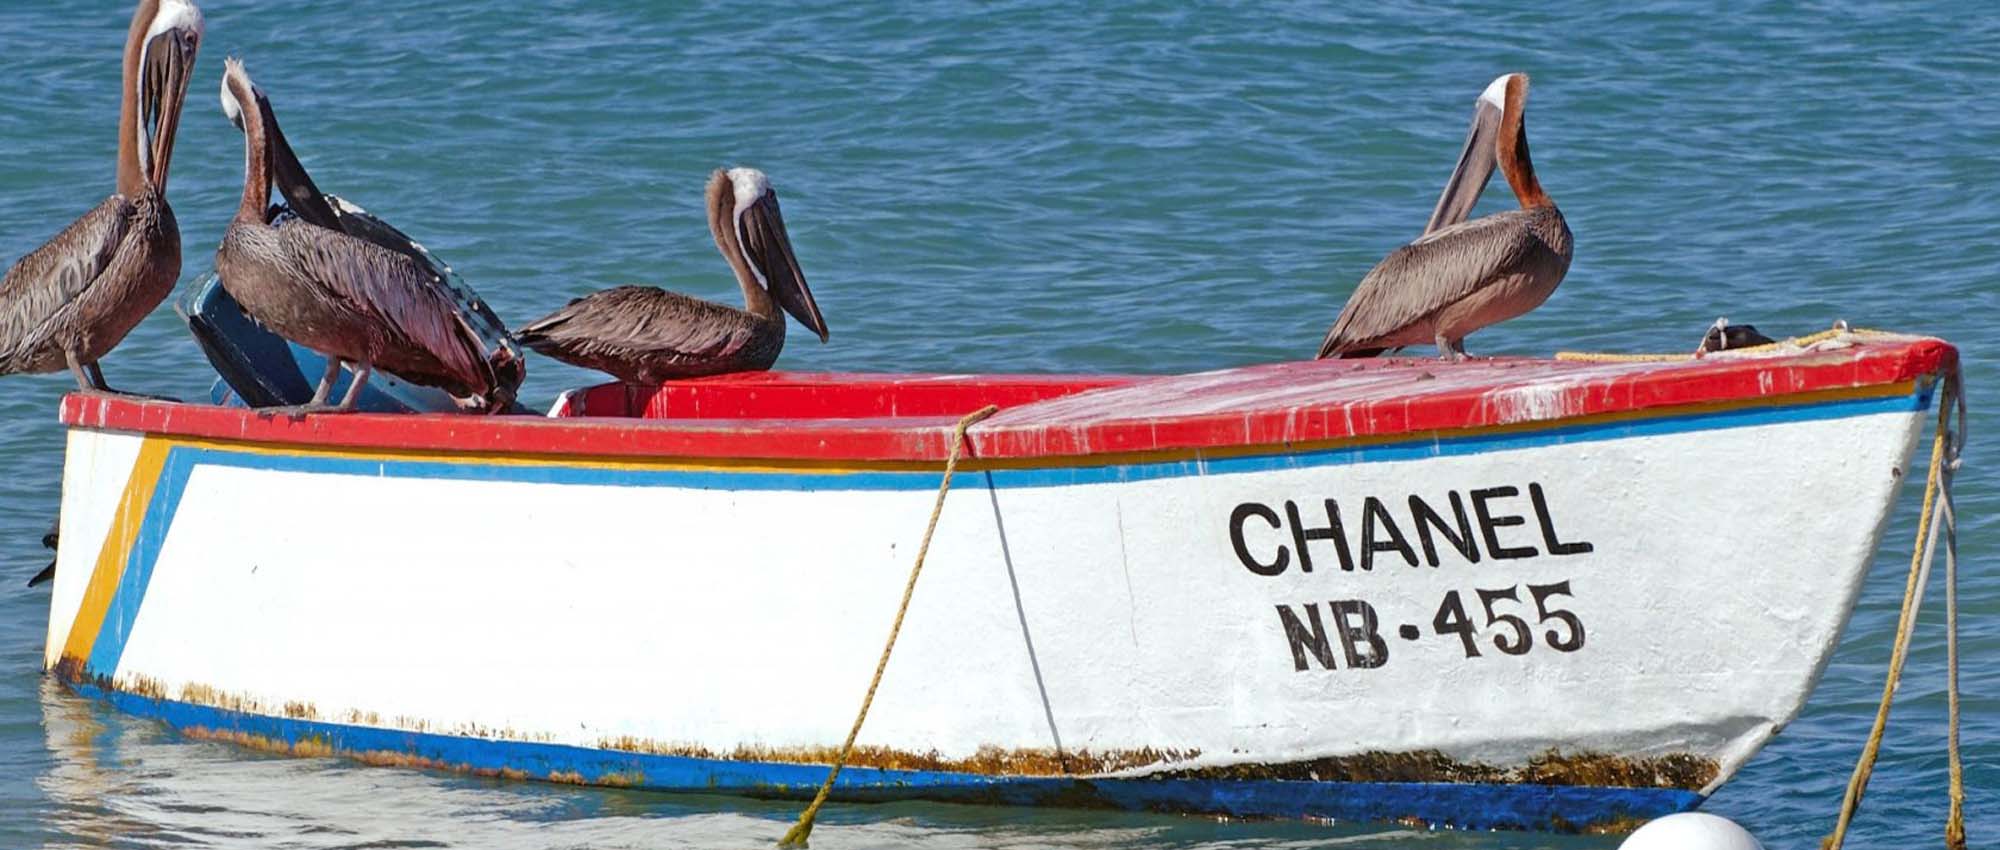 Pelicans sitting on an old boat in the ocean